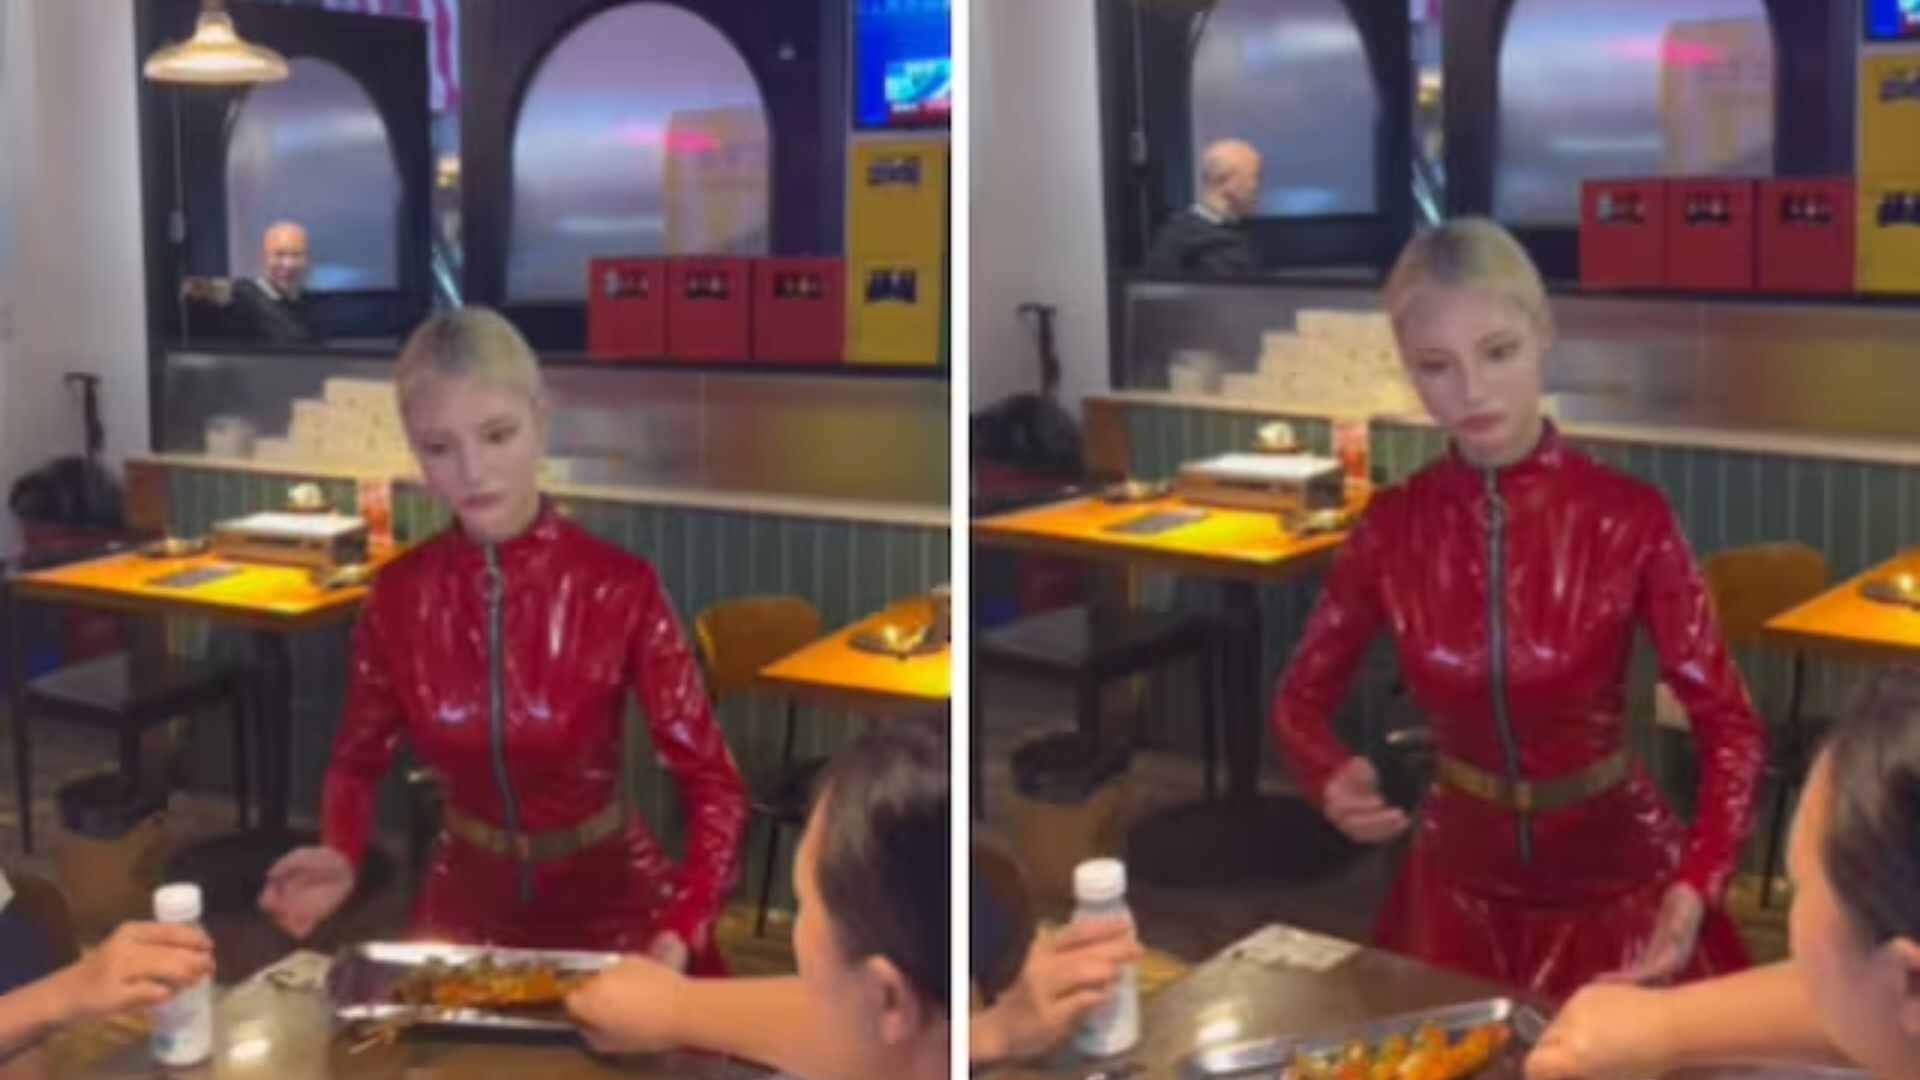 Watch: Waitress Acts Like Robot While Serving Food At Restaurant, Netizens Shocked